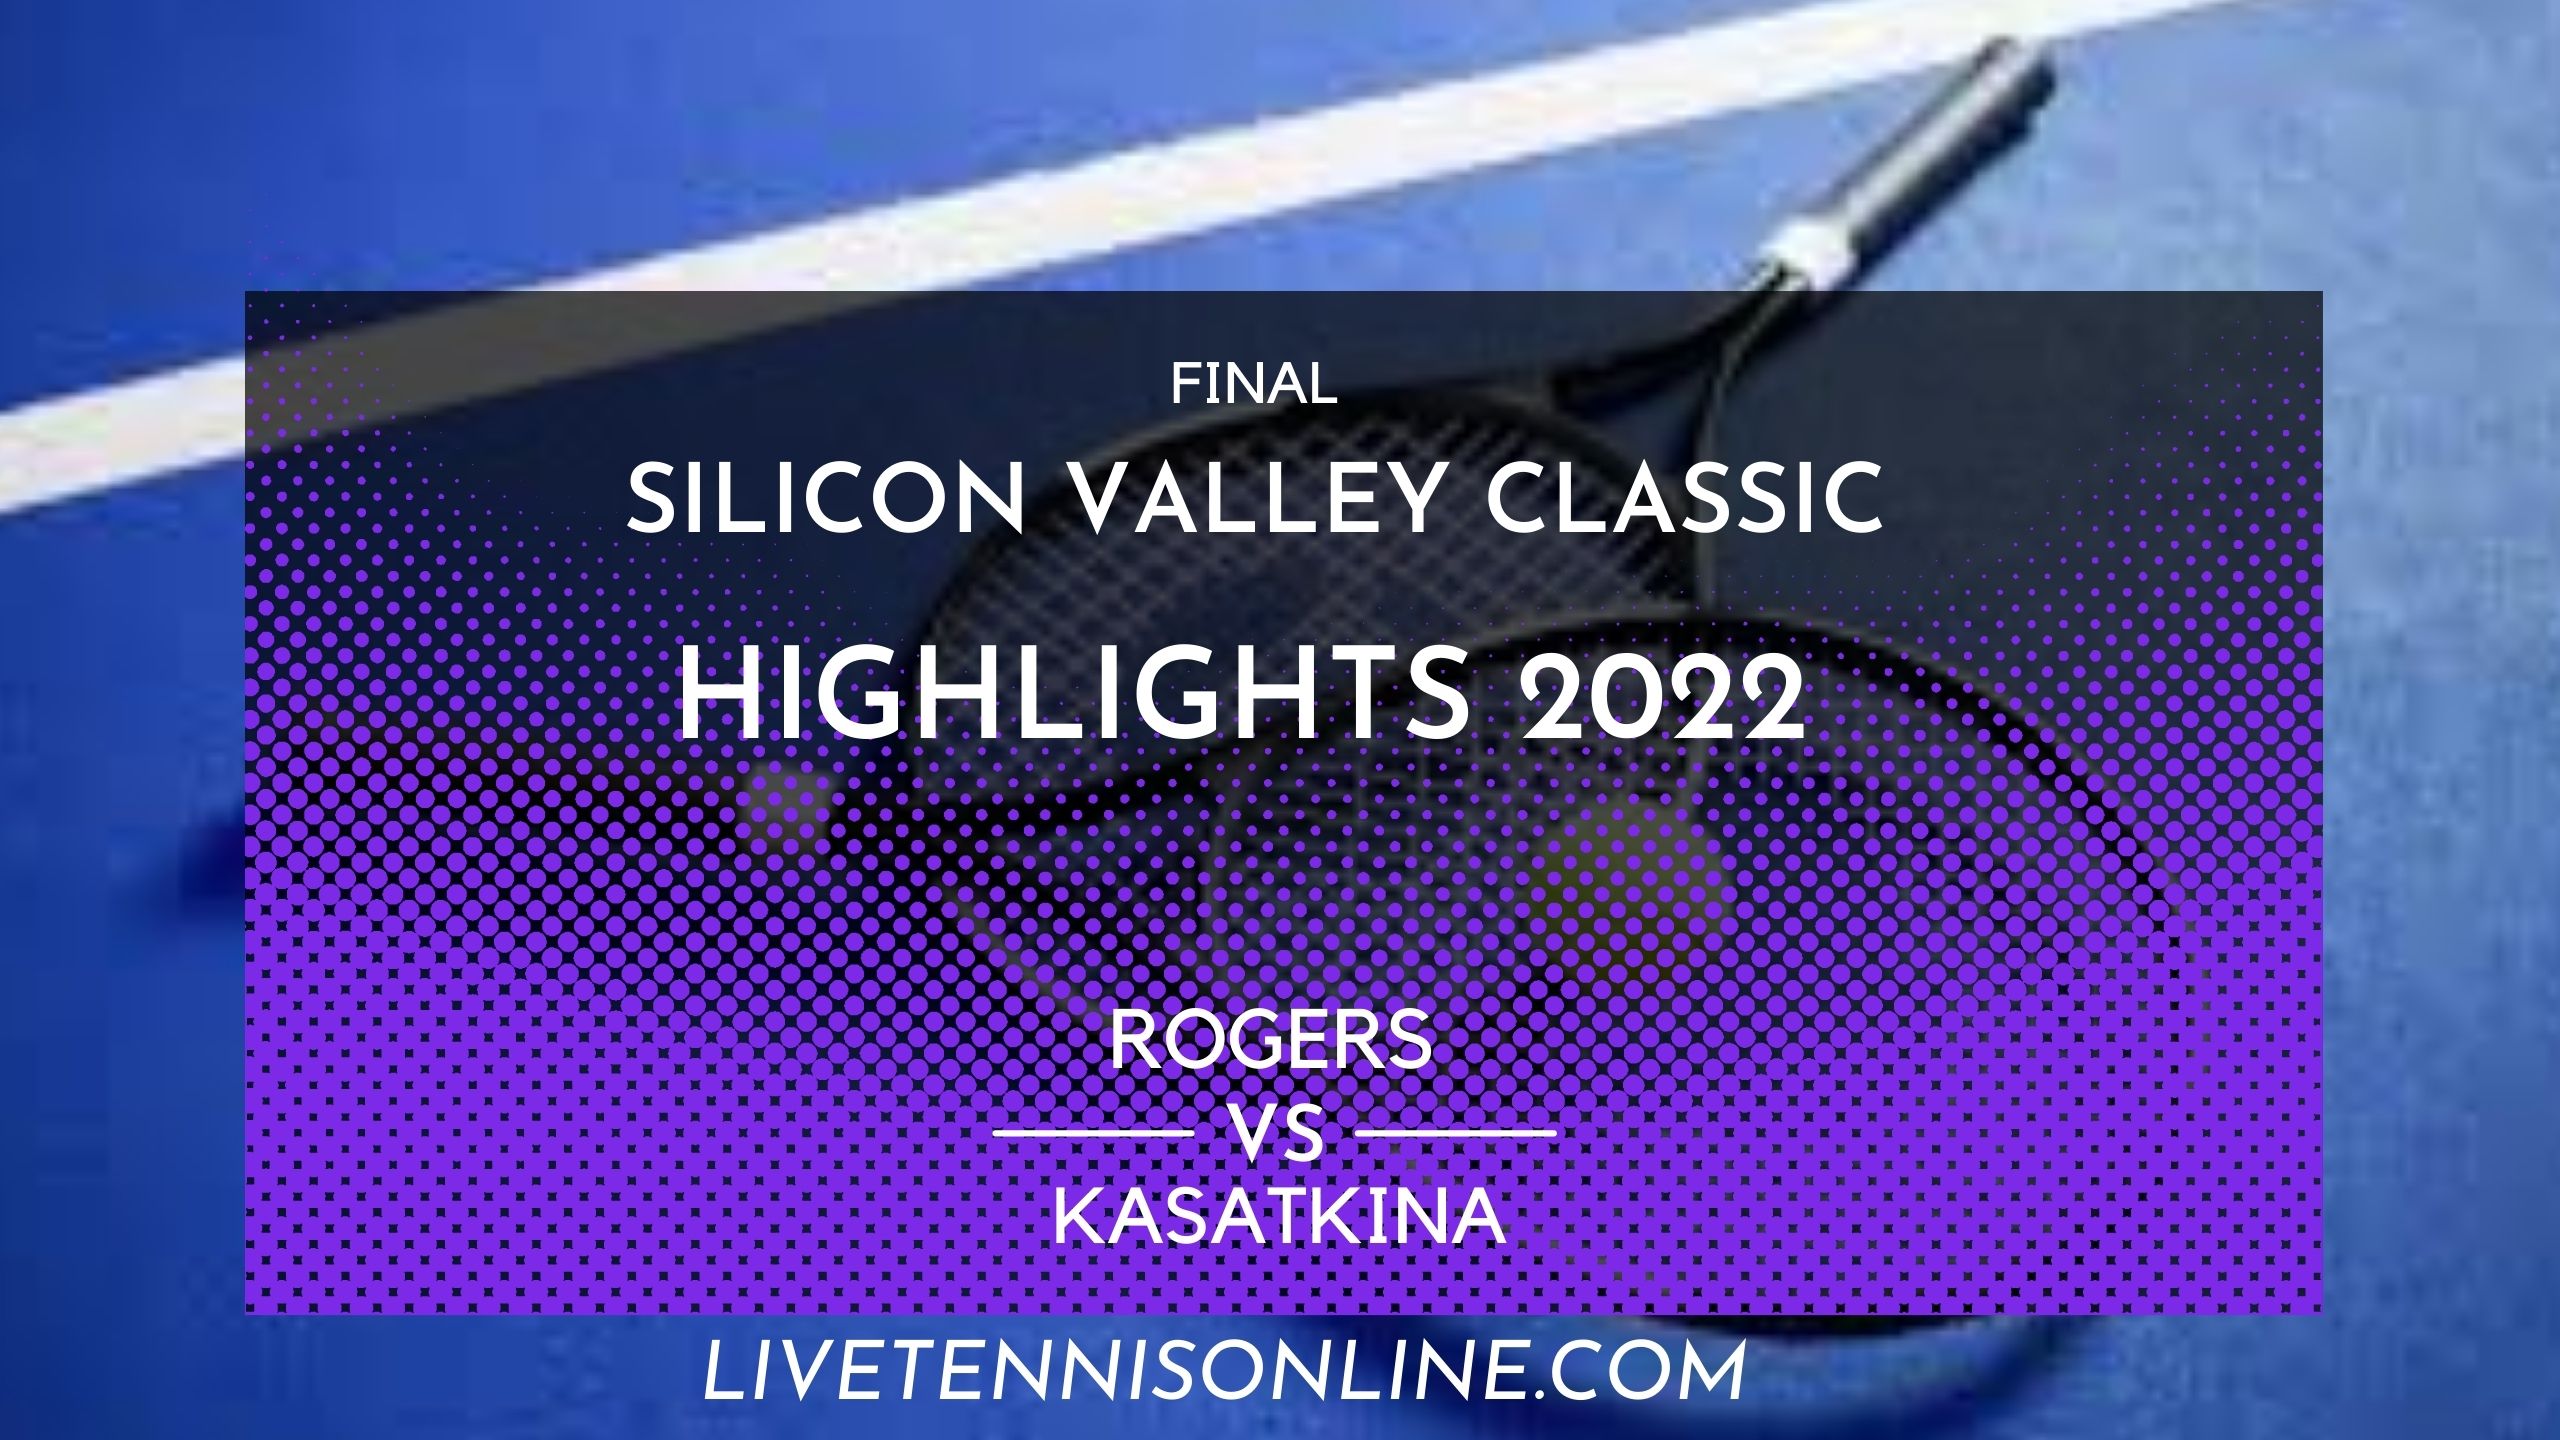 Rogers Vs Kasatkina Final Highlights 2022 Silicon Valley Classic